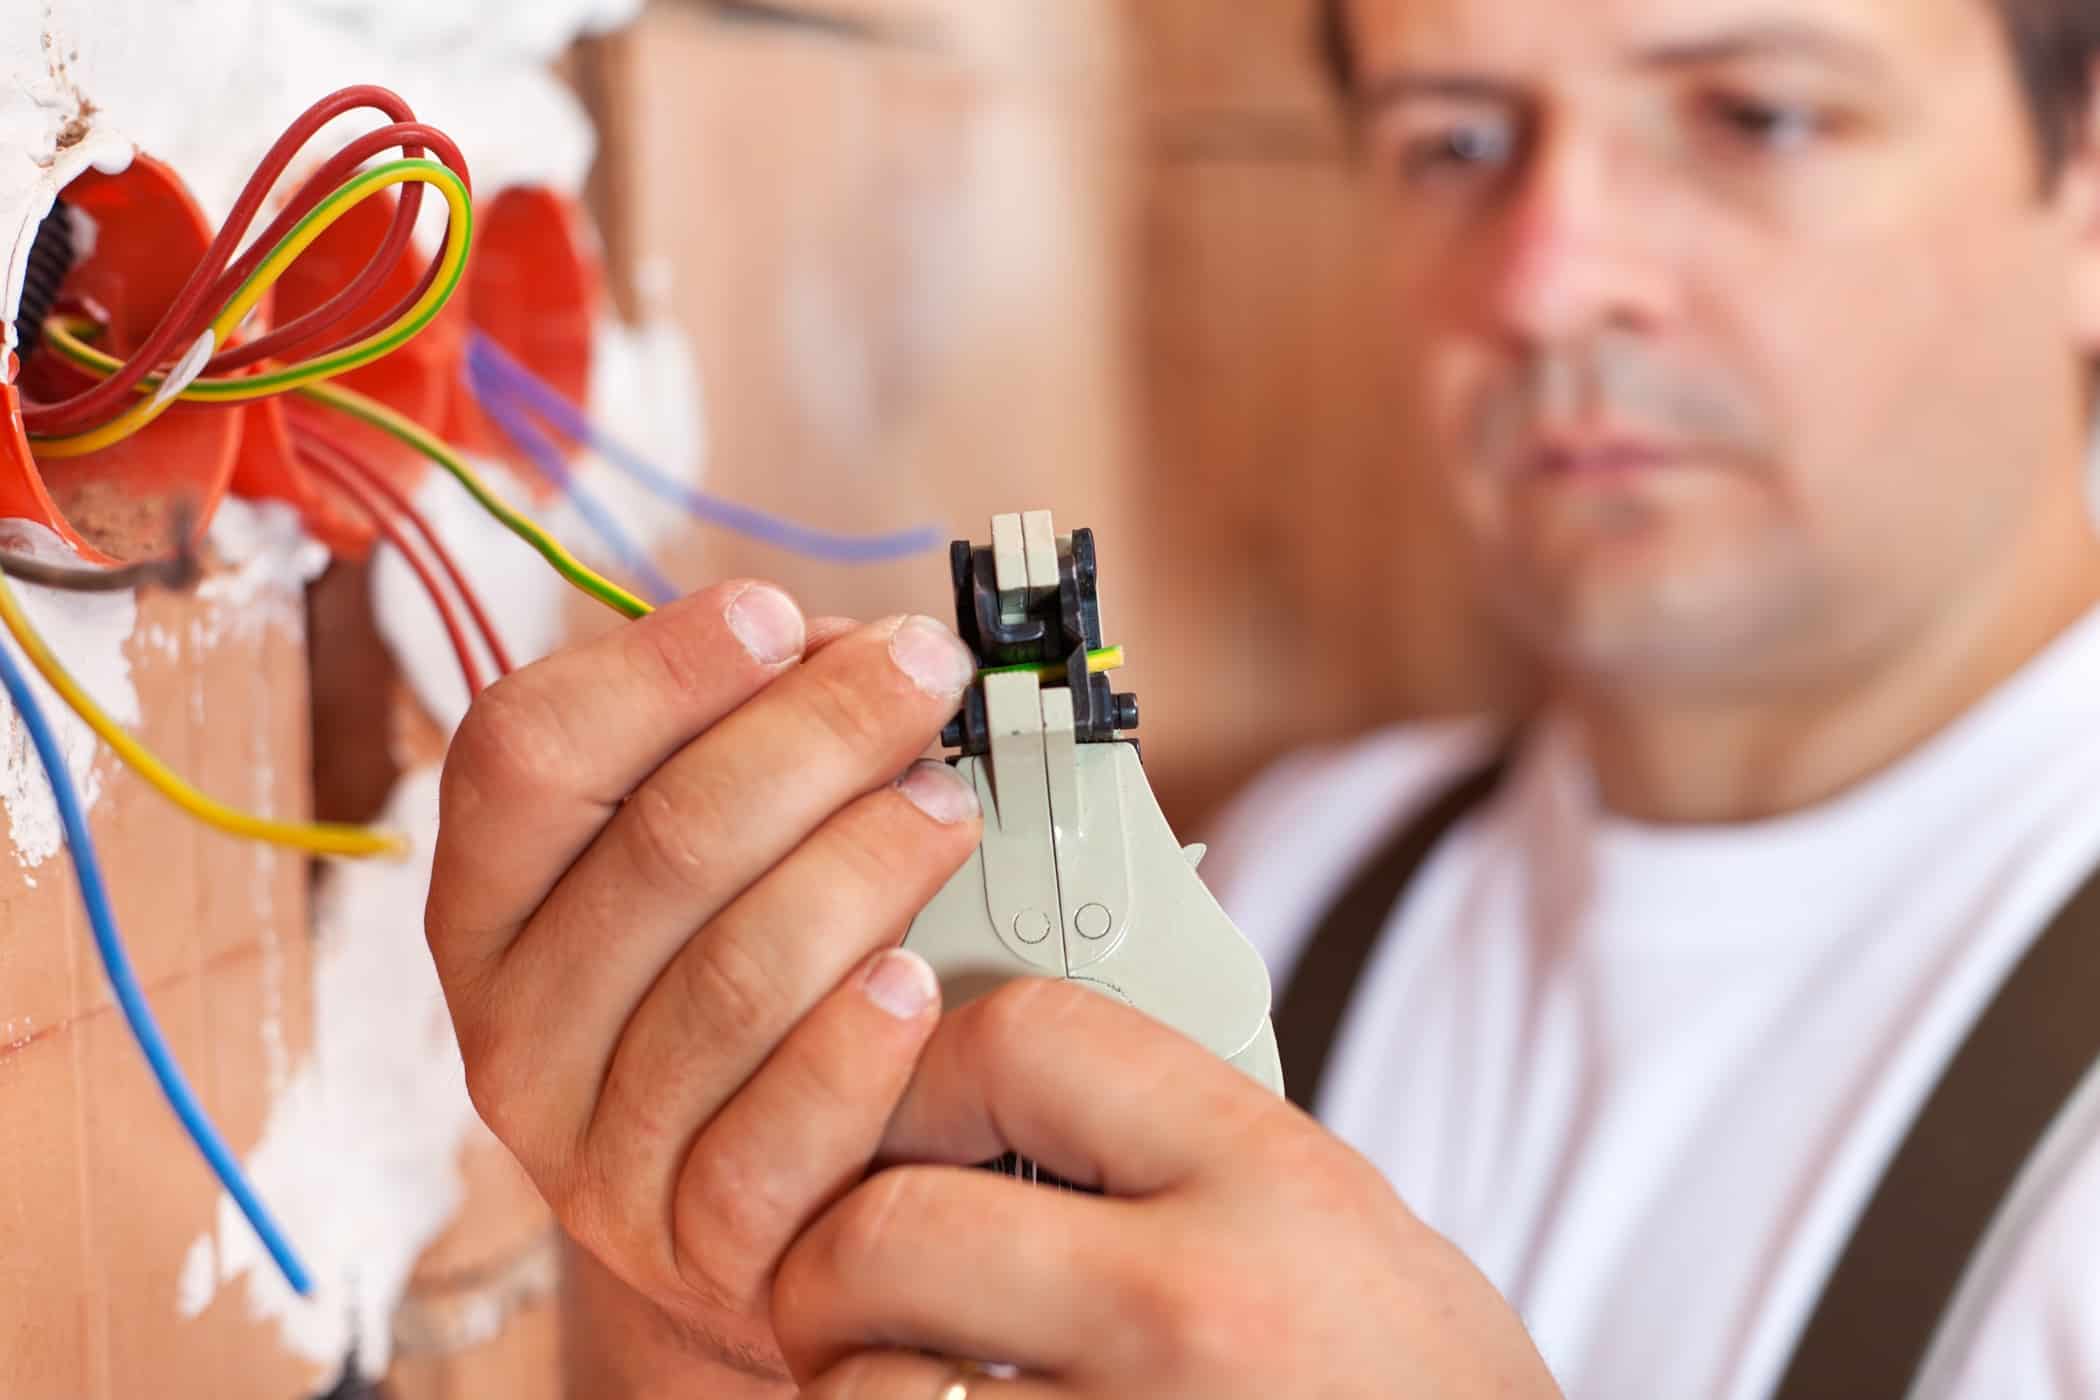 How to find out if an electrician is licensed